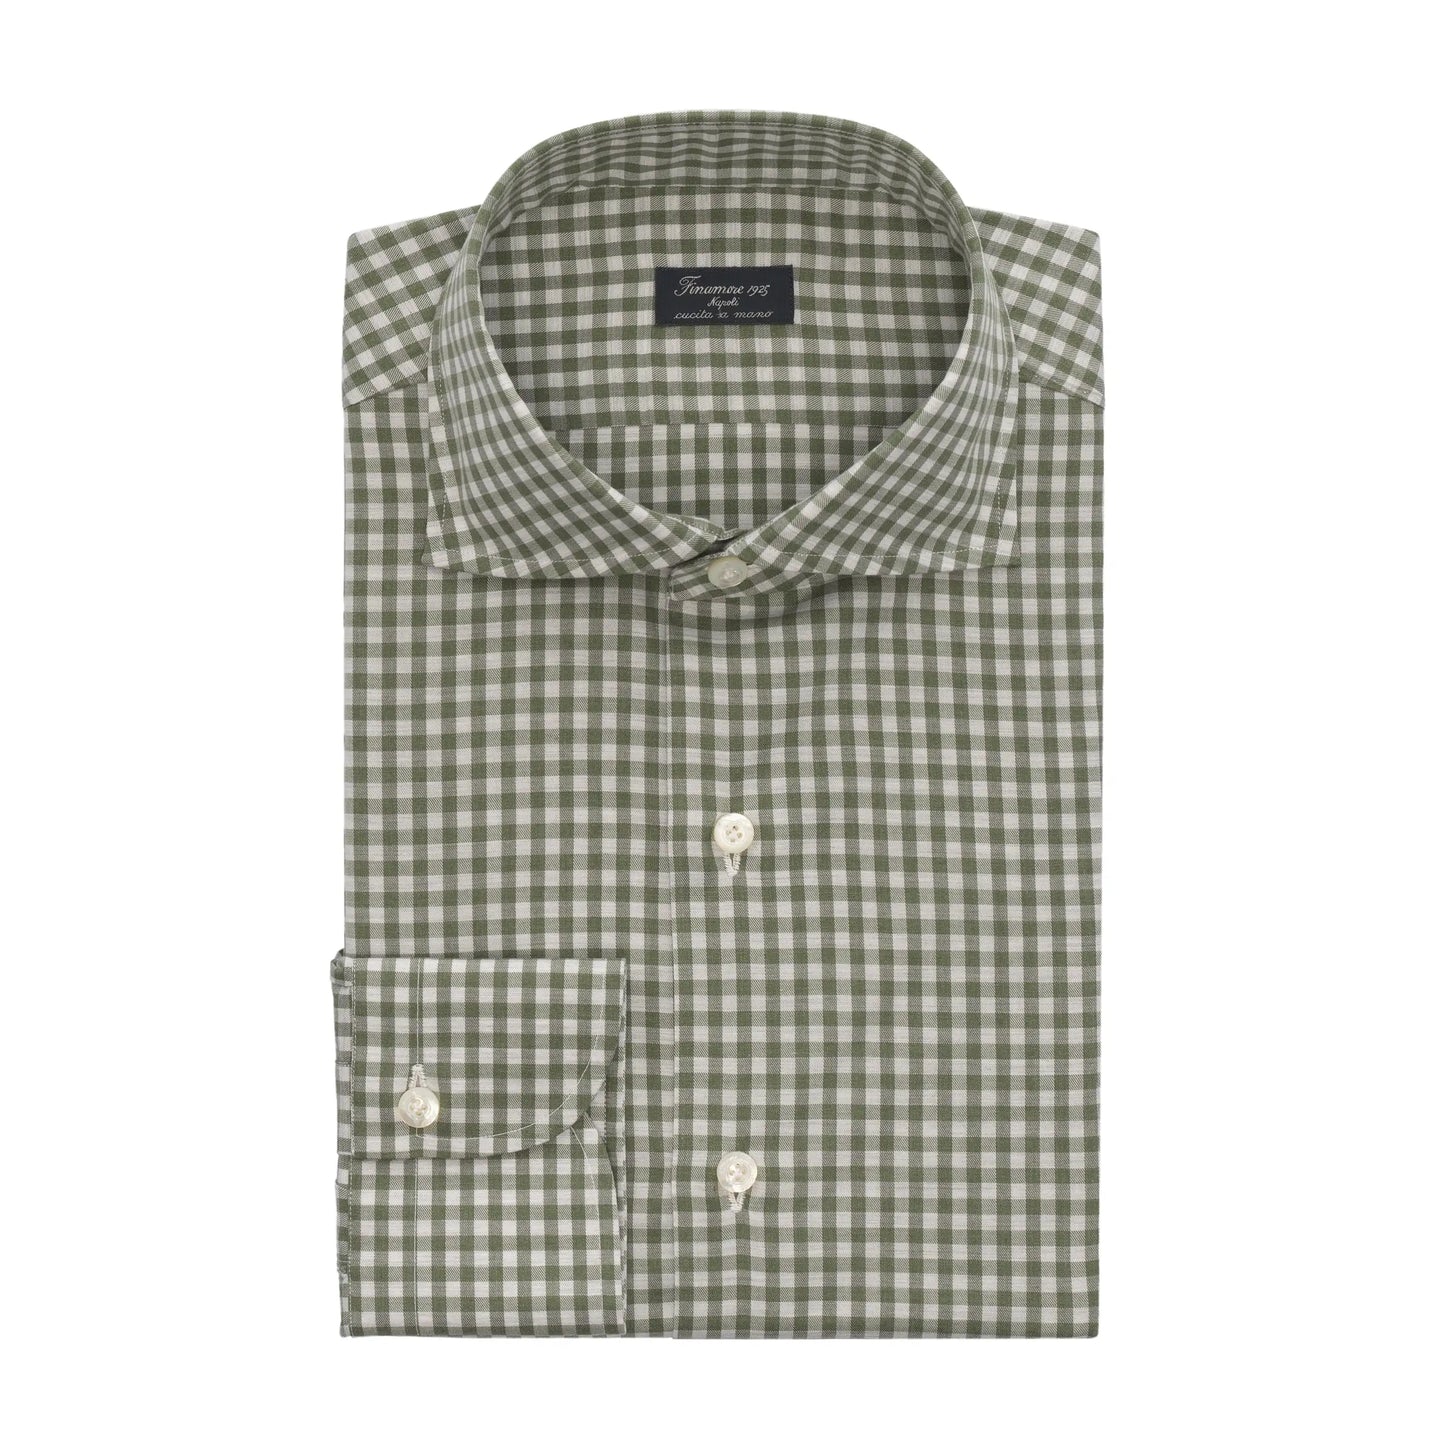 Finamore Checked Green and White Cotton Shirt - SARTALE